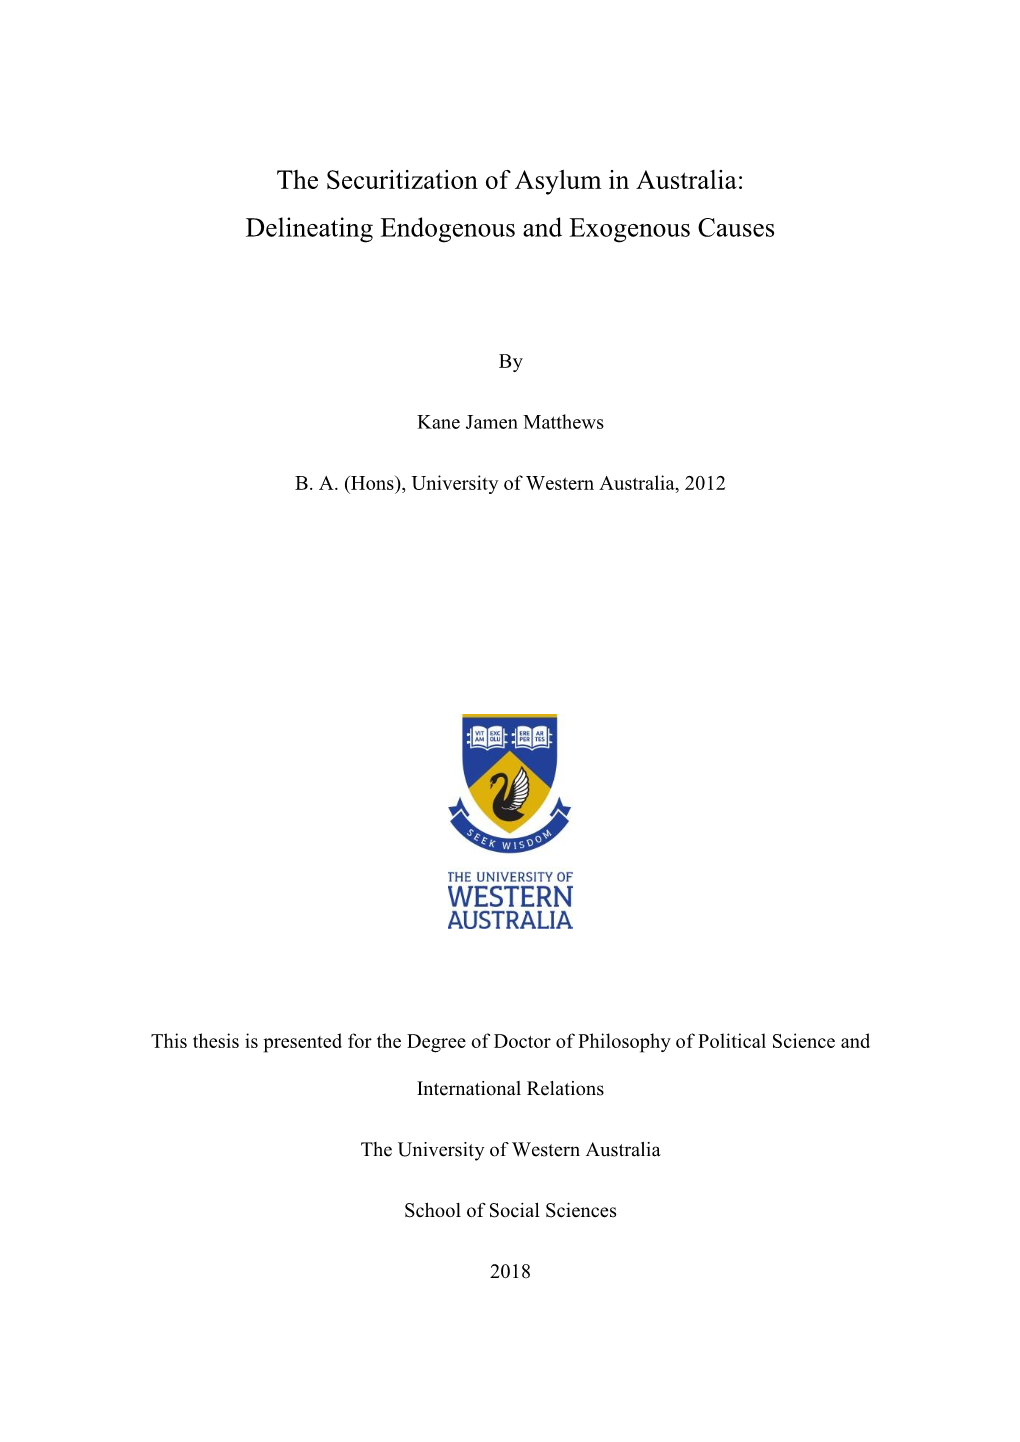 The Securitization of Asylum in Australia: Delineating Endogenous and Exogenous Causes